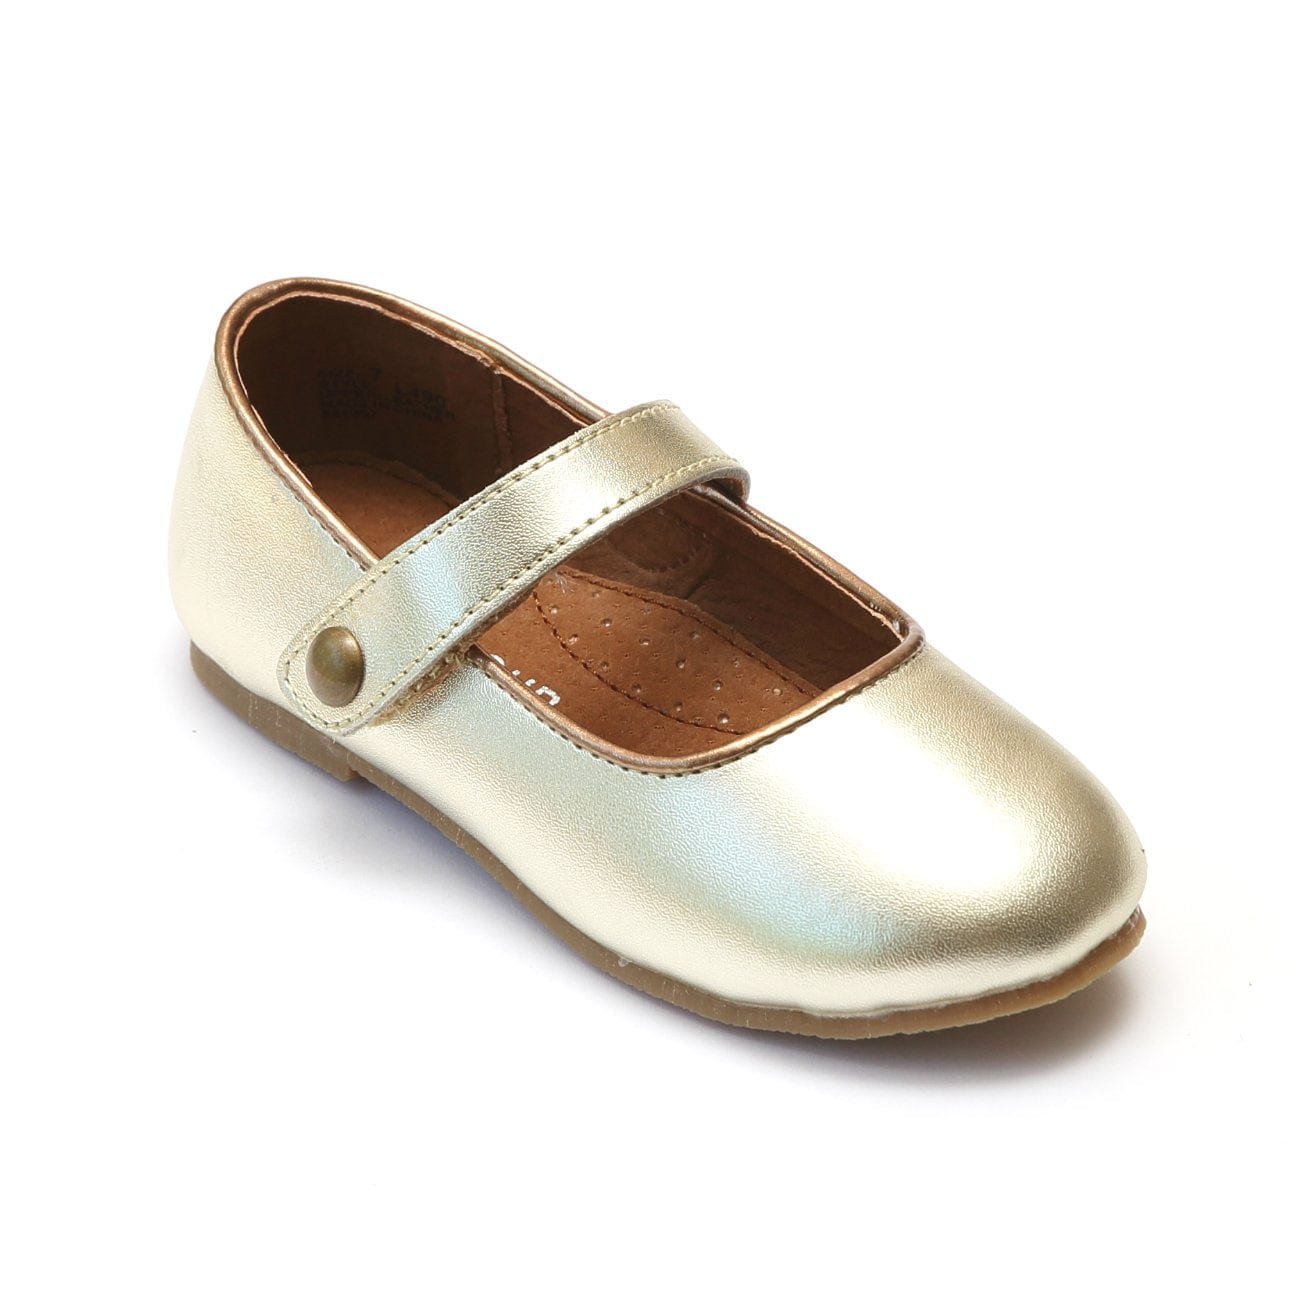 L'amour - L'Amour Girls Classic Button Strap Leather Flats - Little Miss Muffin Children & Home